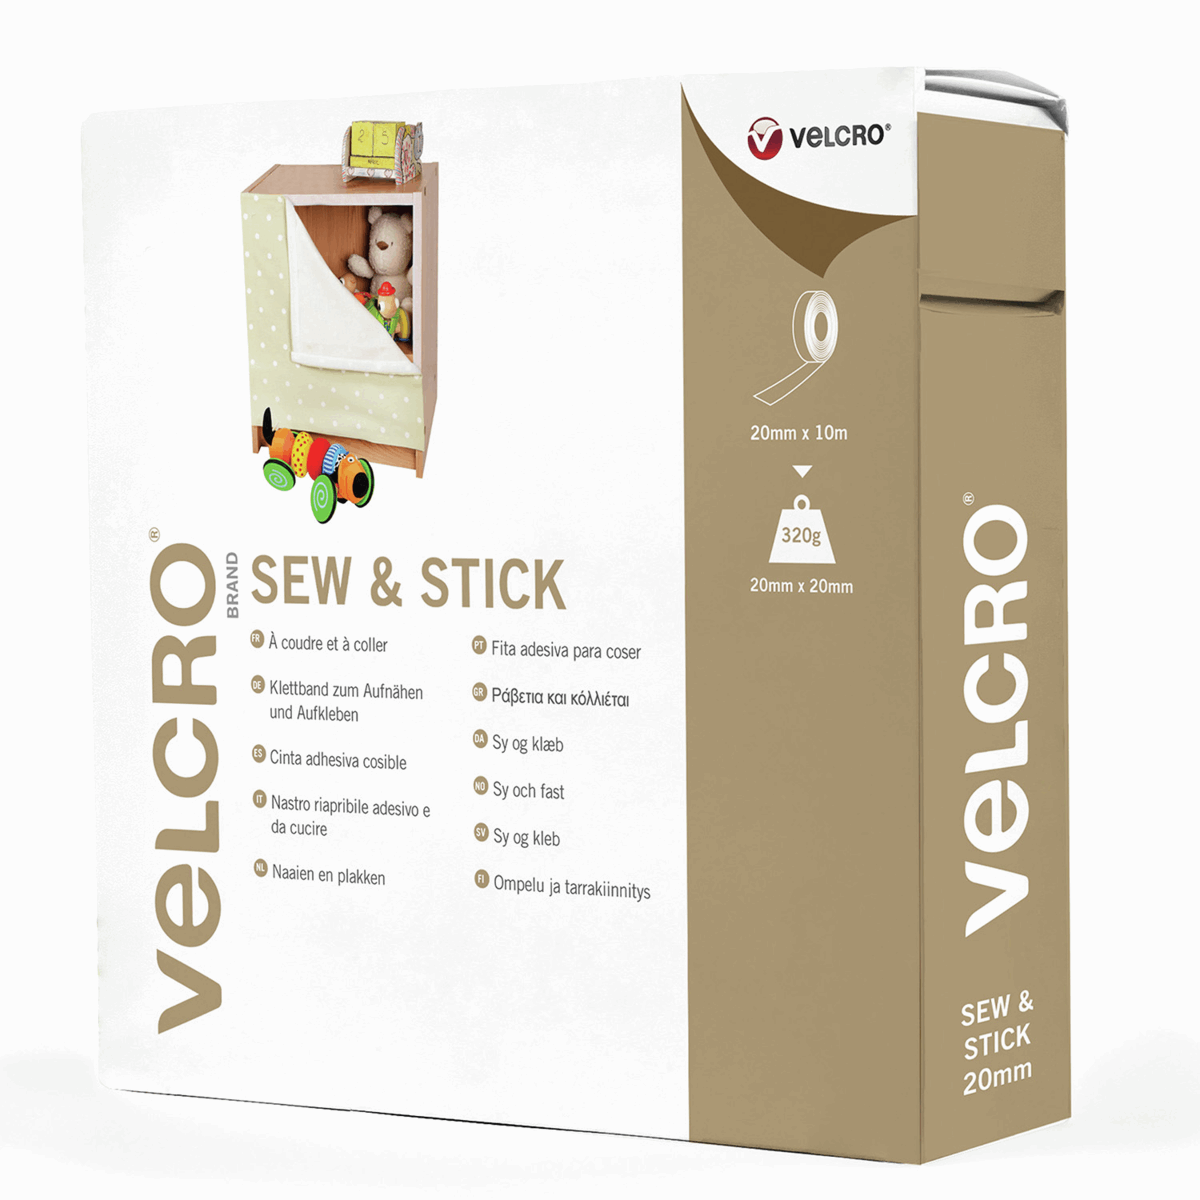 Velcro 20mm - Sew and Stick